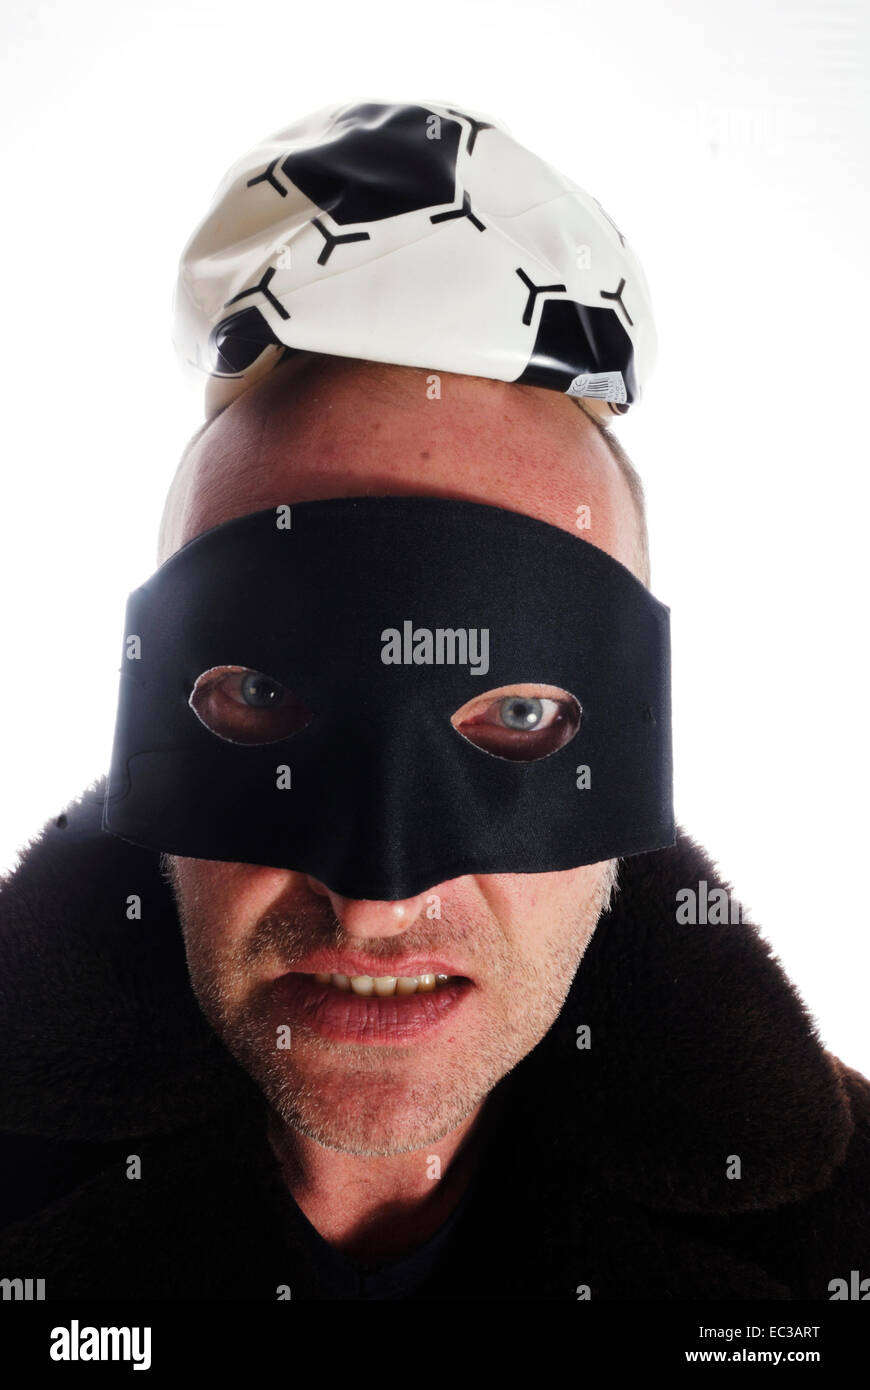 Man with Mask and Soccerball Stock Photo